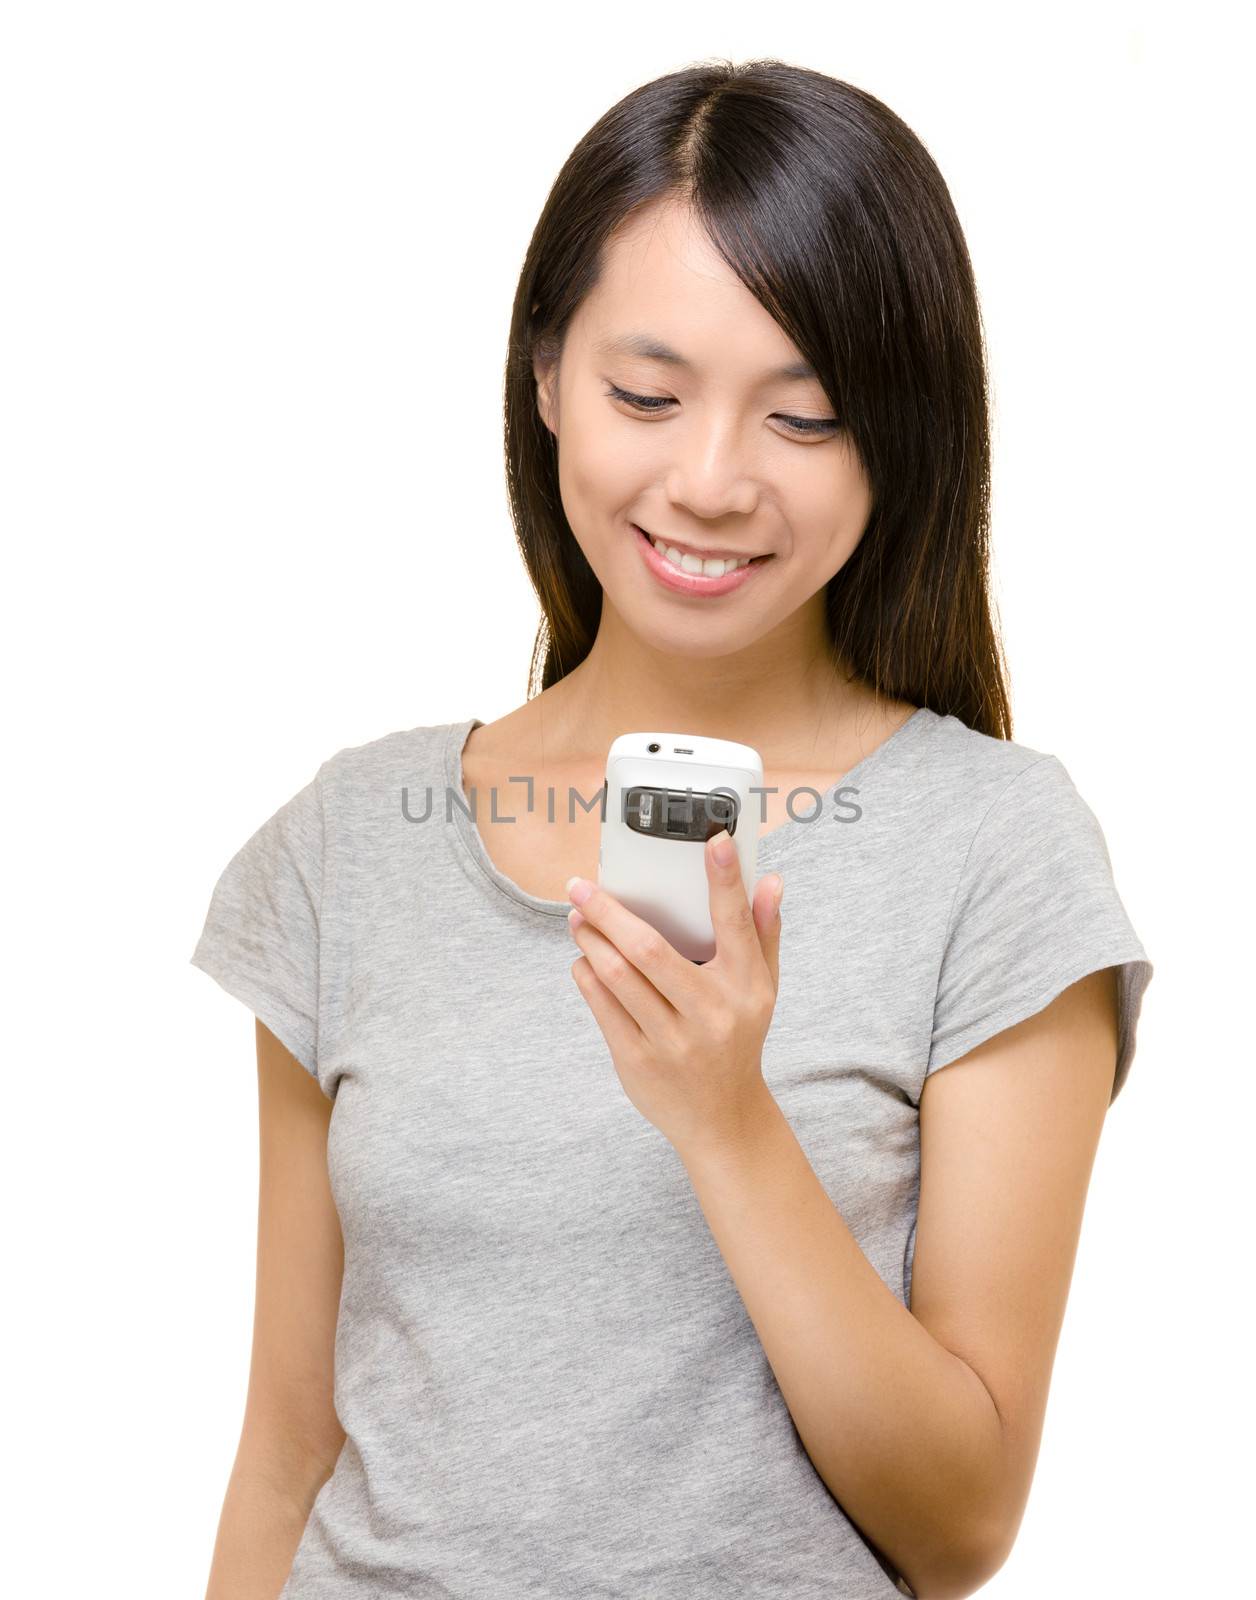 Asian woman using mobile